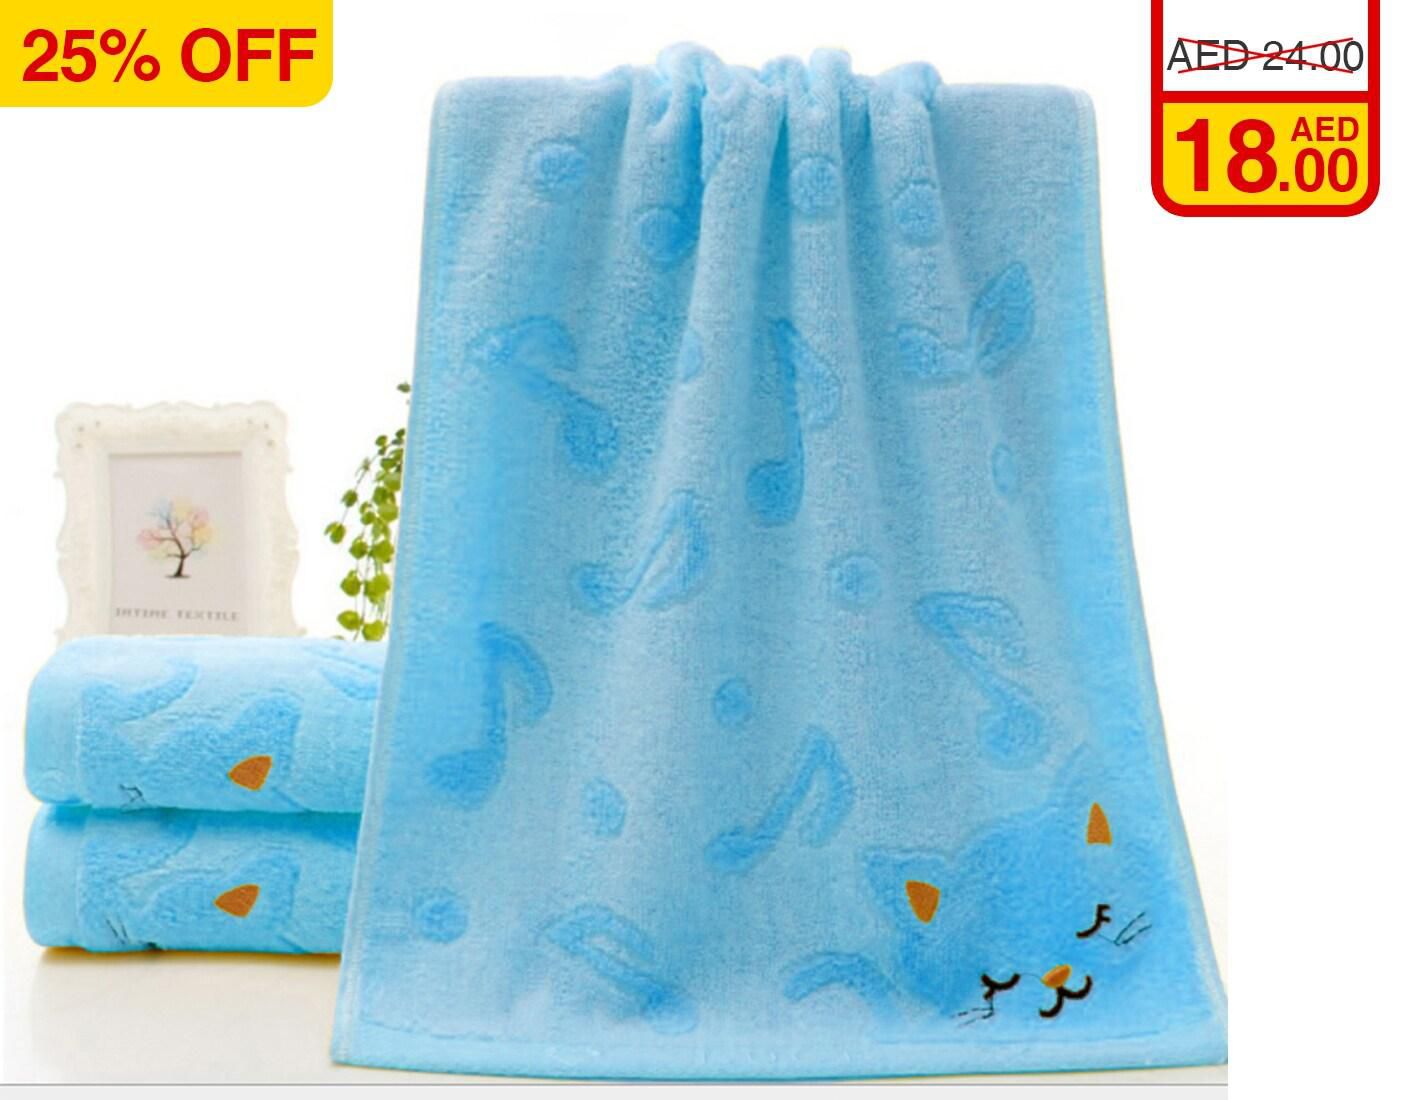 SunBaby Kids Bamboo Towels (Buy 1 Get 1 Free)-Available Color-Blue, Yellow, Green